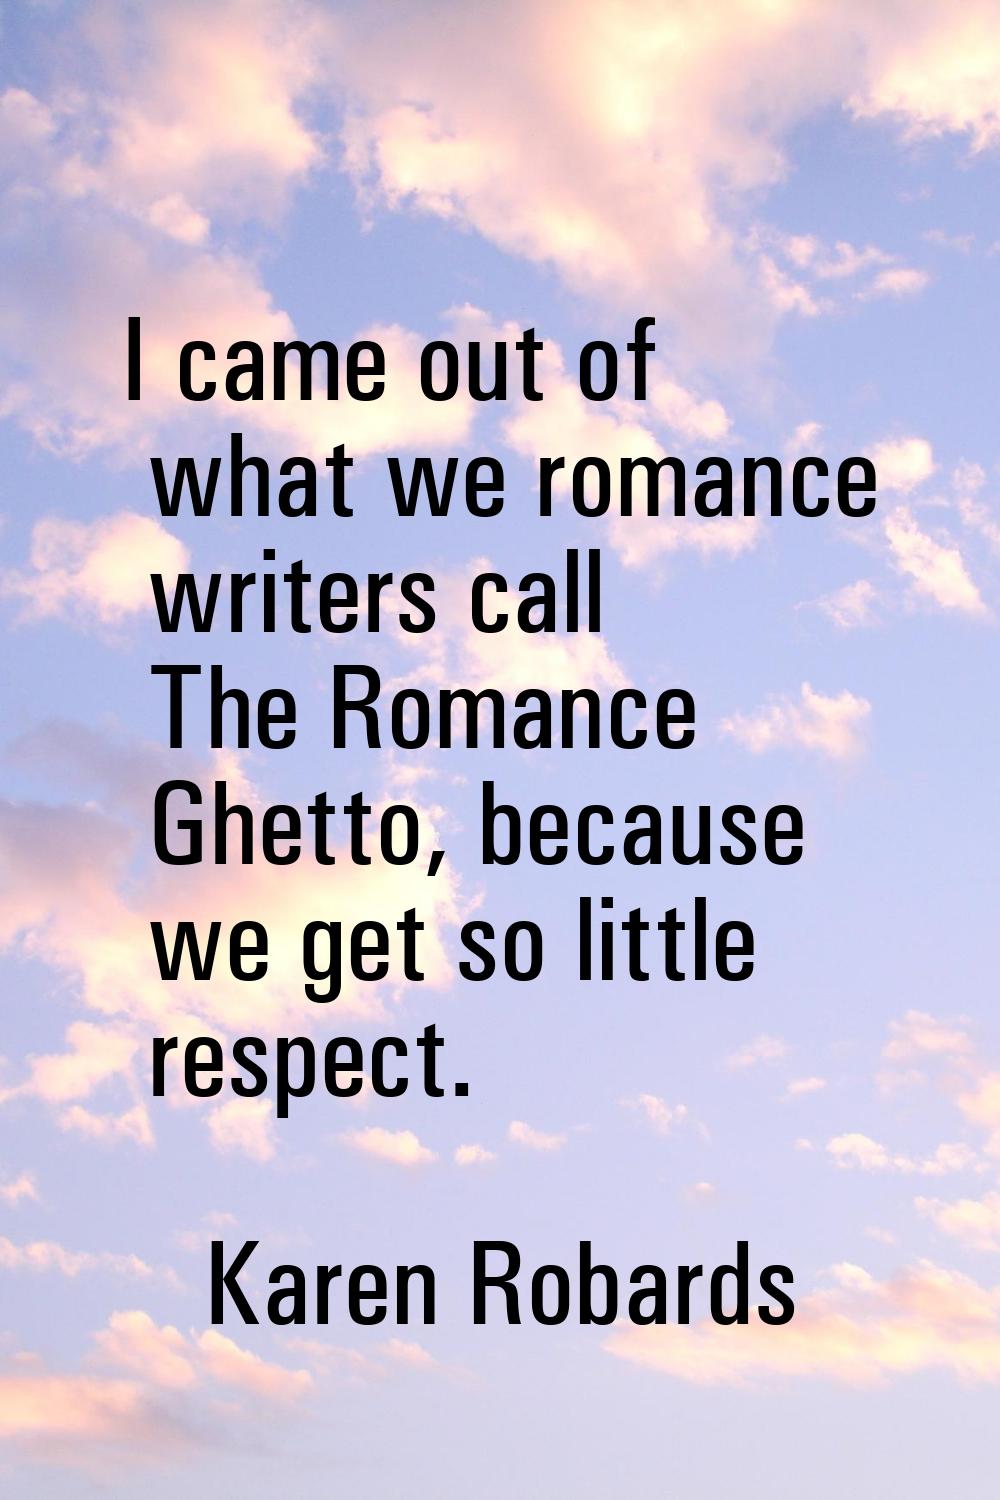 I came out of what we romance writers call The Romance Ghetto, because we get so little respect.